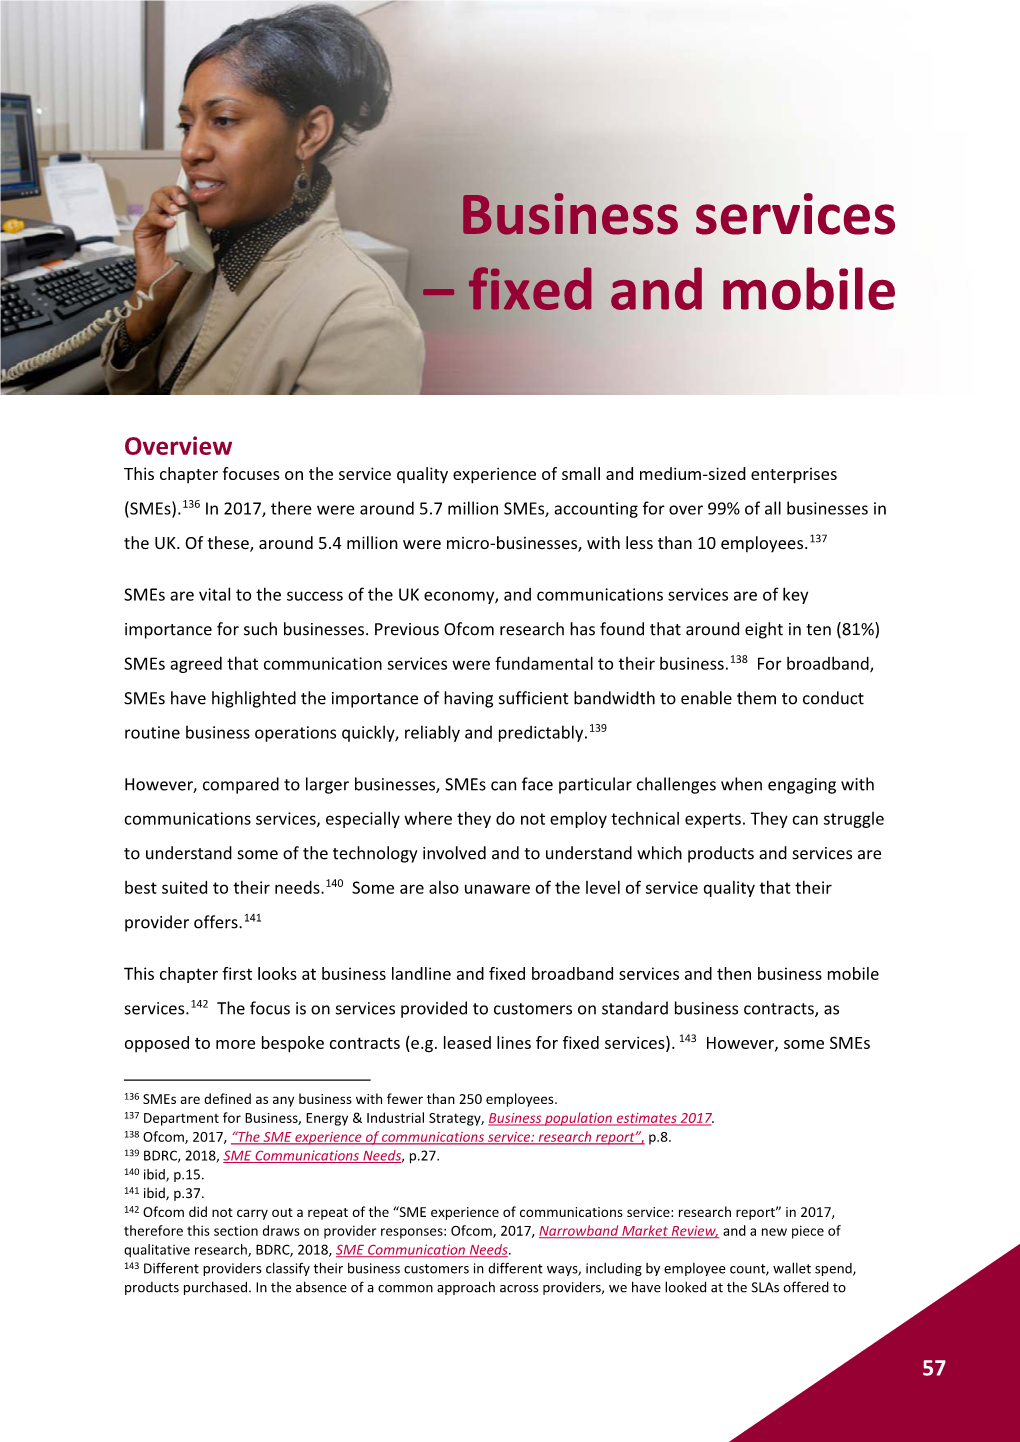 Business Services – Fixed and Mobile